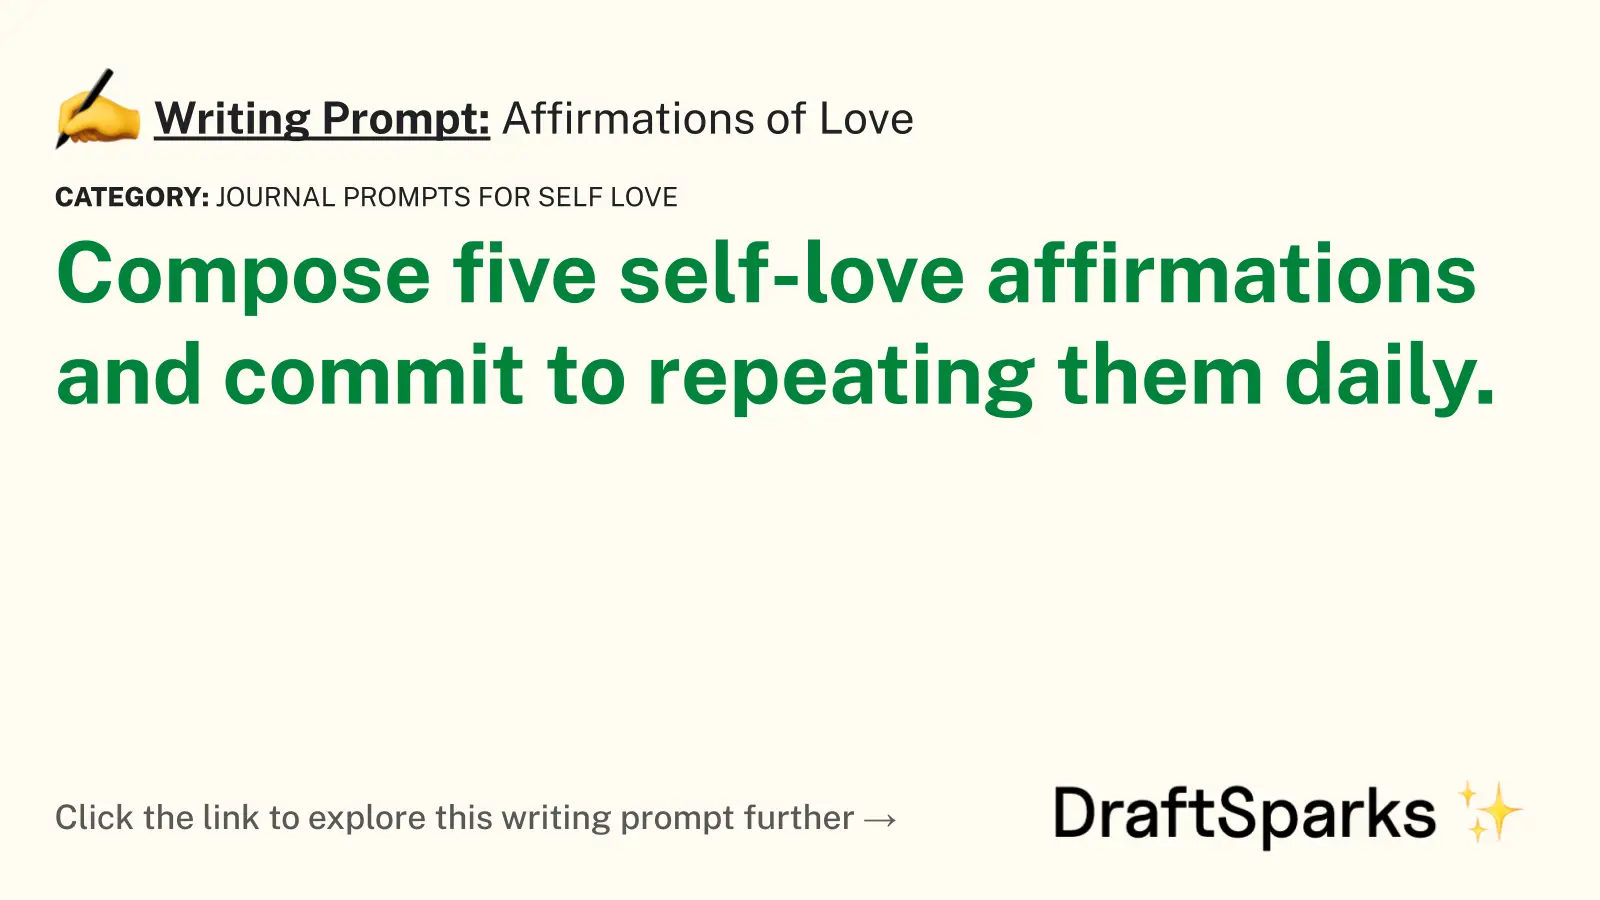 Affirmations of Love